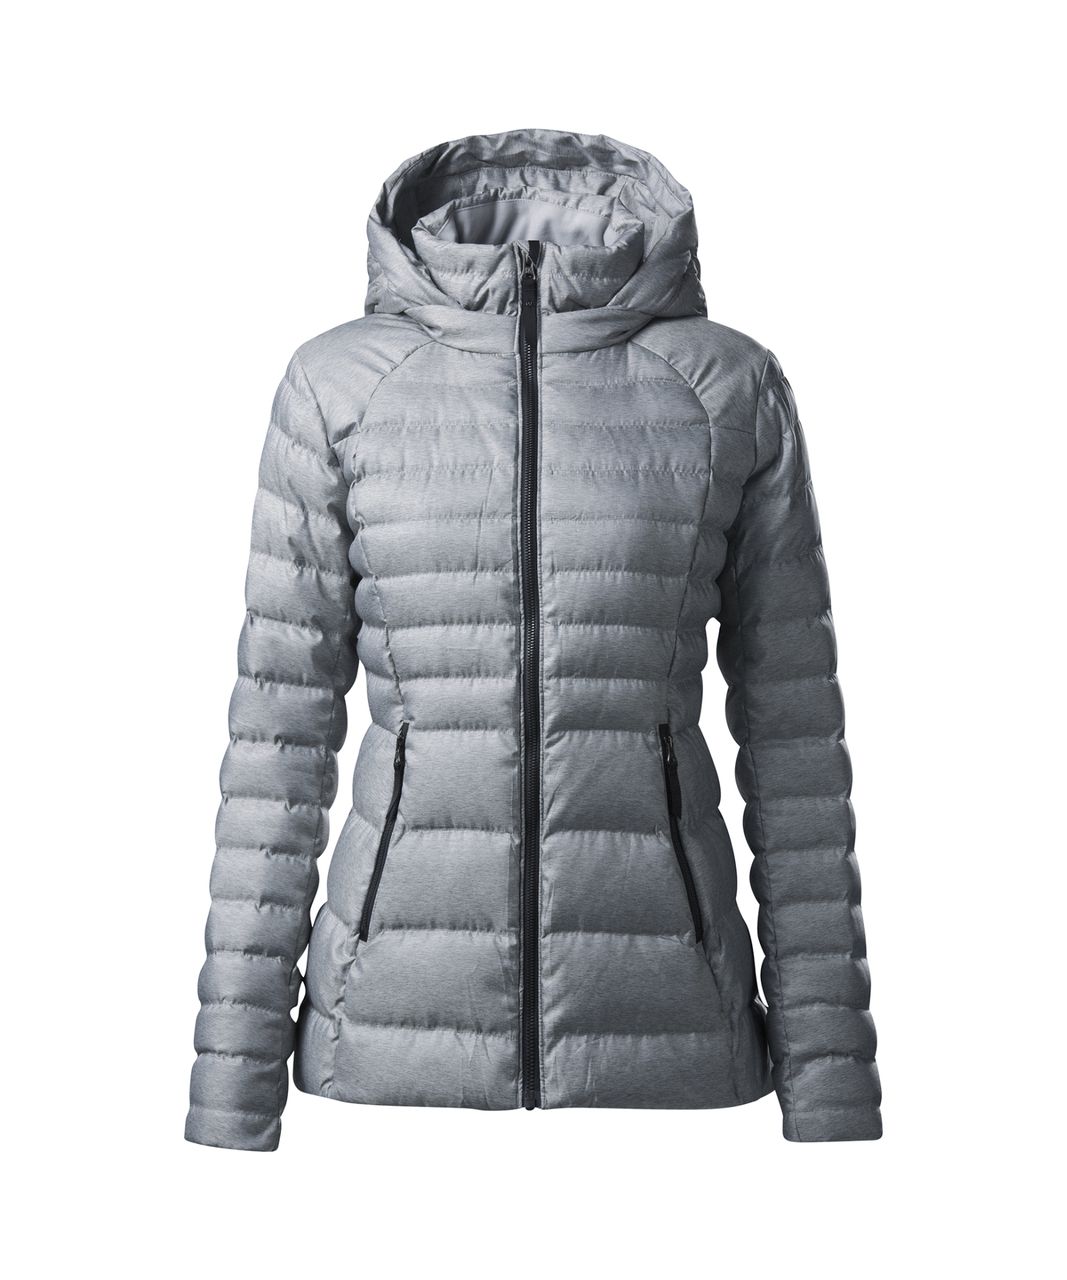 Lululemon Down For It Jacket - White / Silver